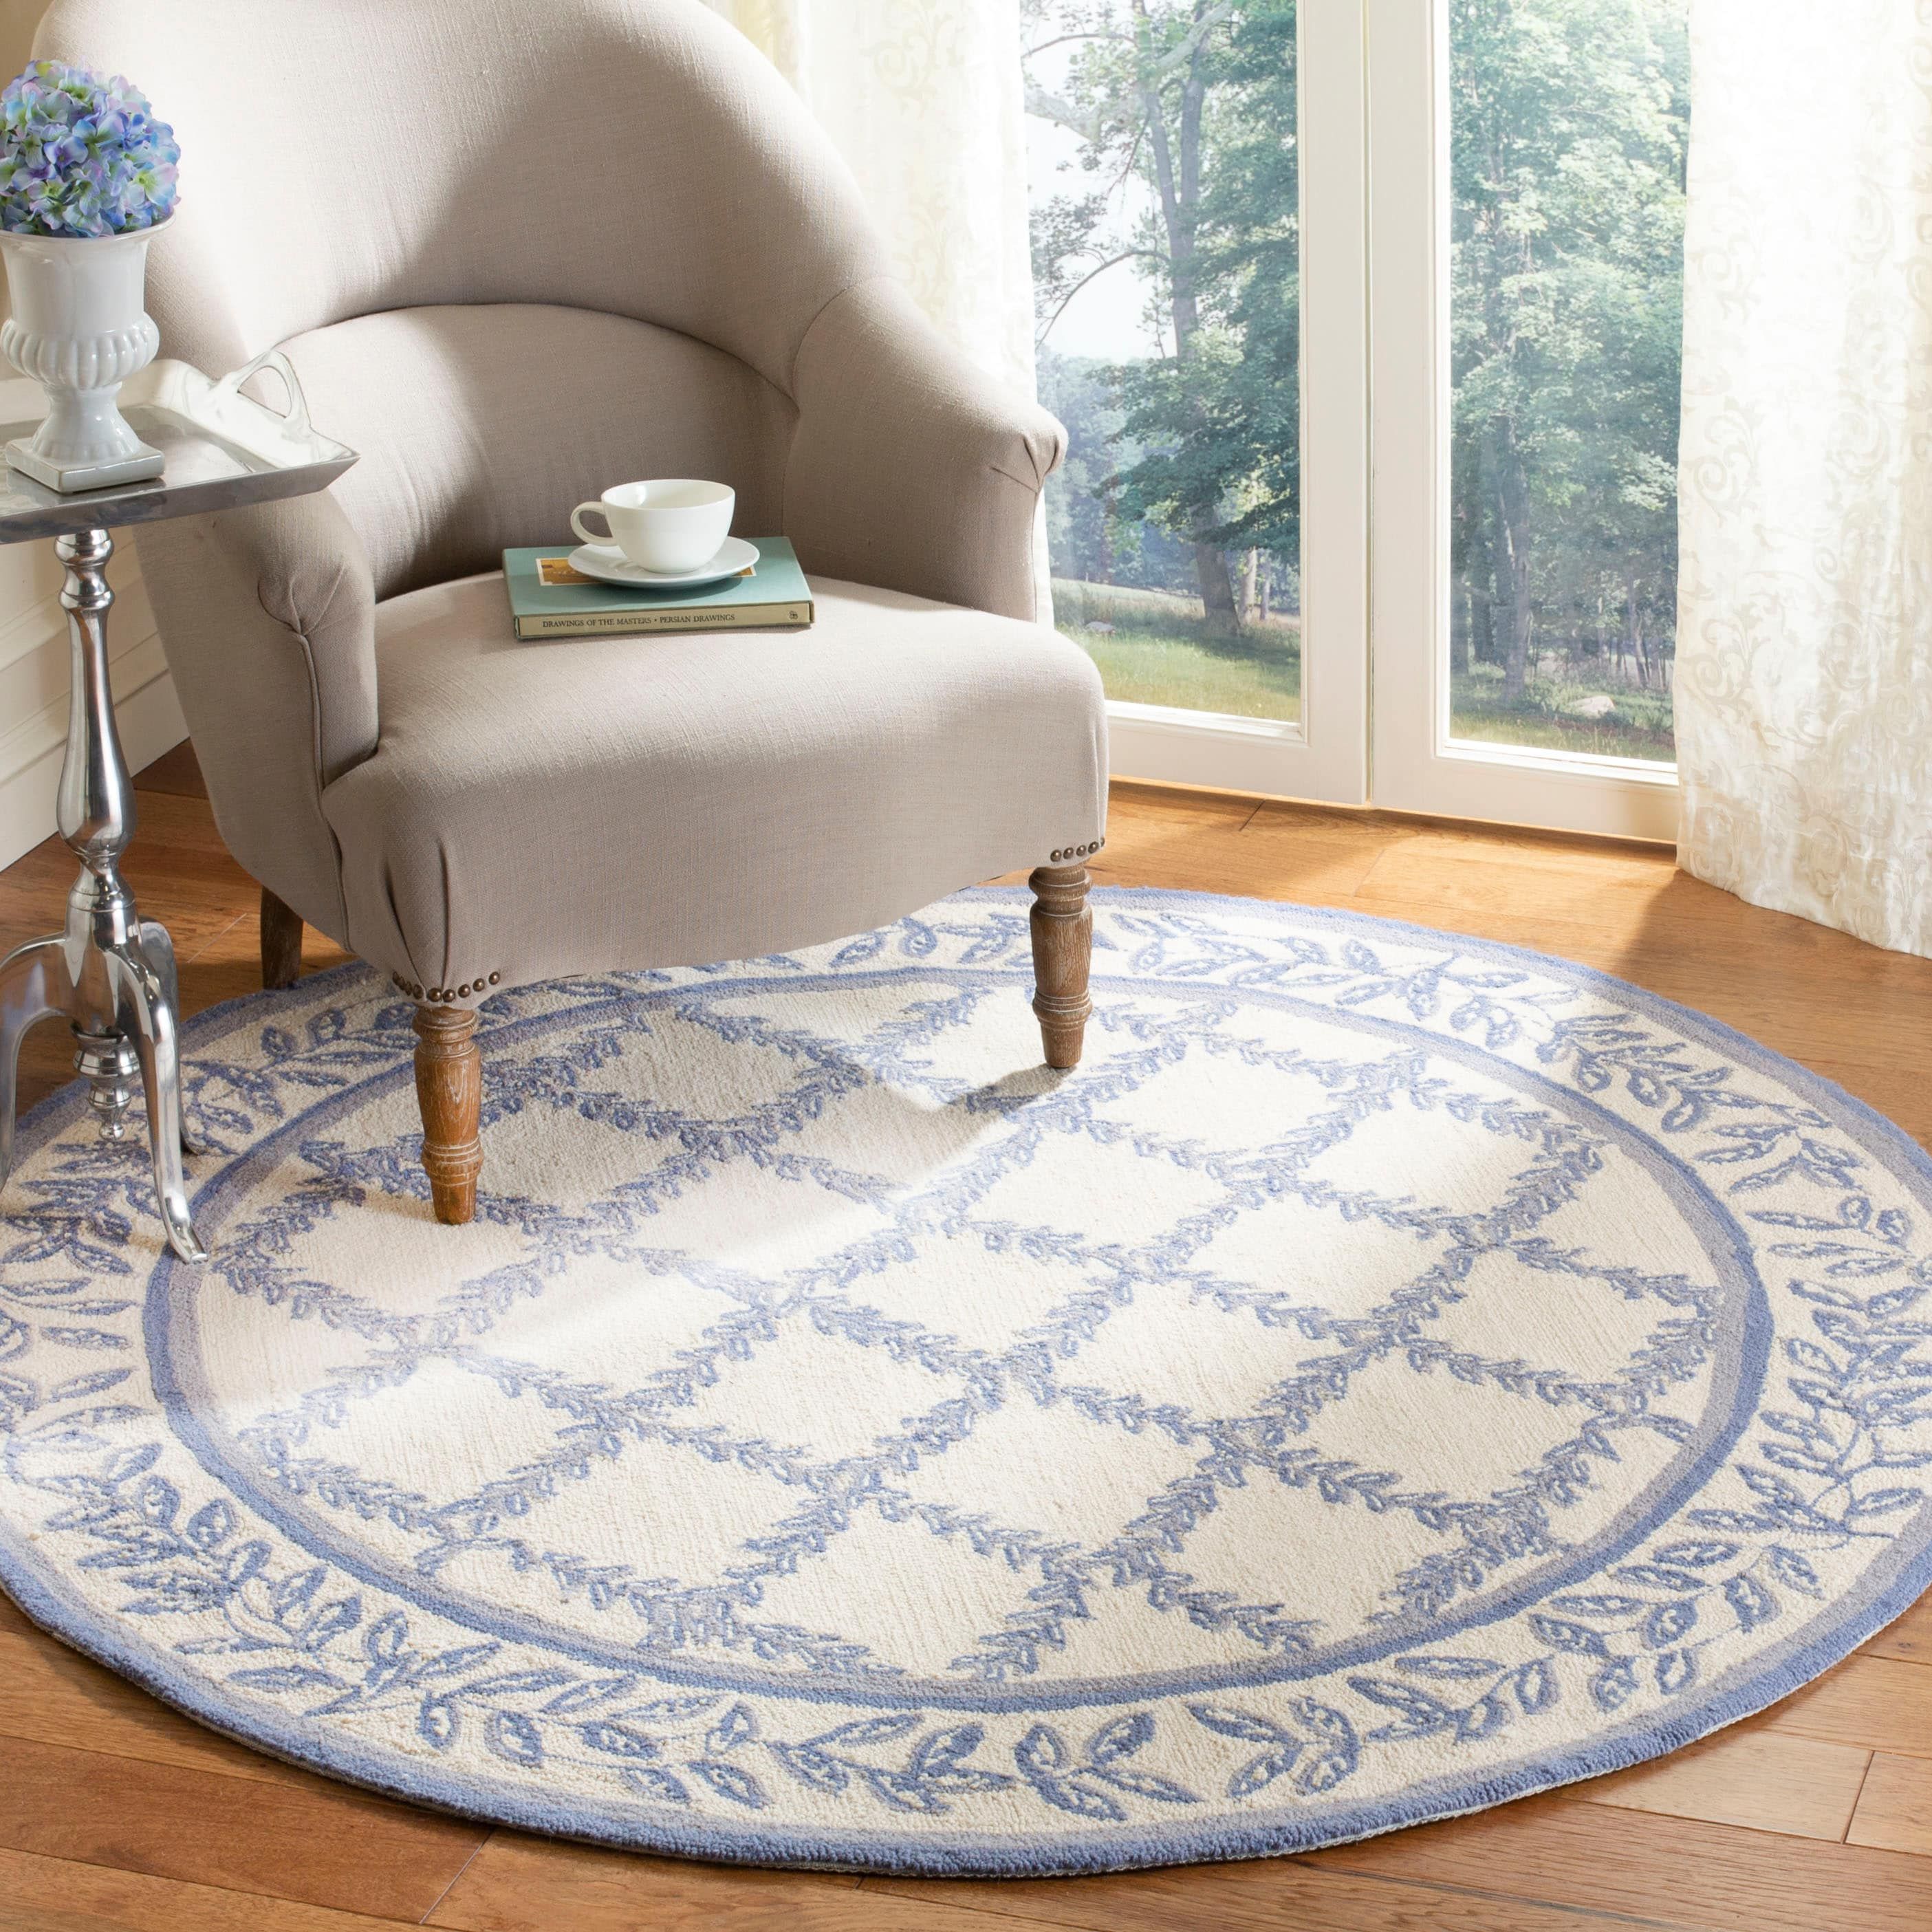 Safavieh Chelsea Lattice 8 X 10 Wool Ivory/Light Blue Oval Indoor  Floral/Botanical Tropical Area Rug In The Rugs Department At Lowes Inside Lattice Oval Rugs (Photo 6 of 15)